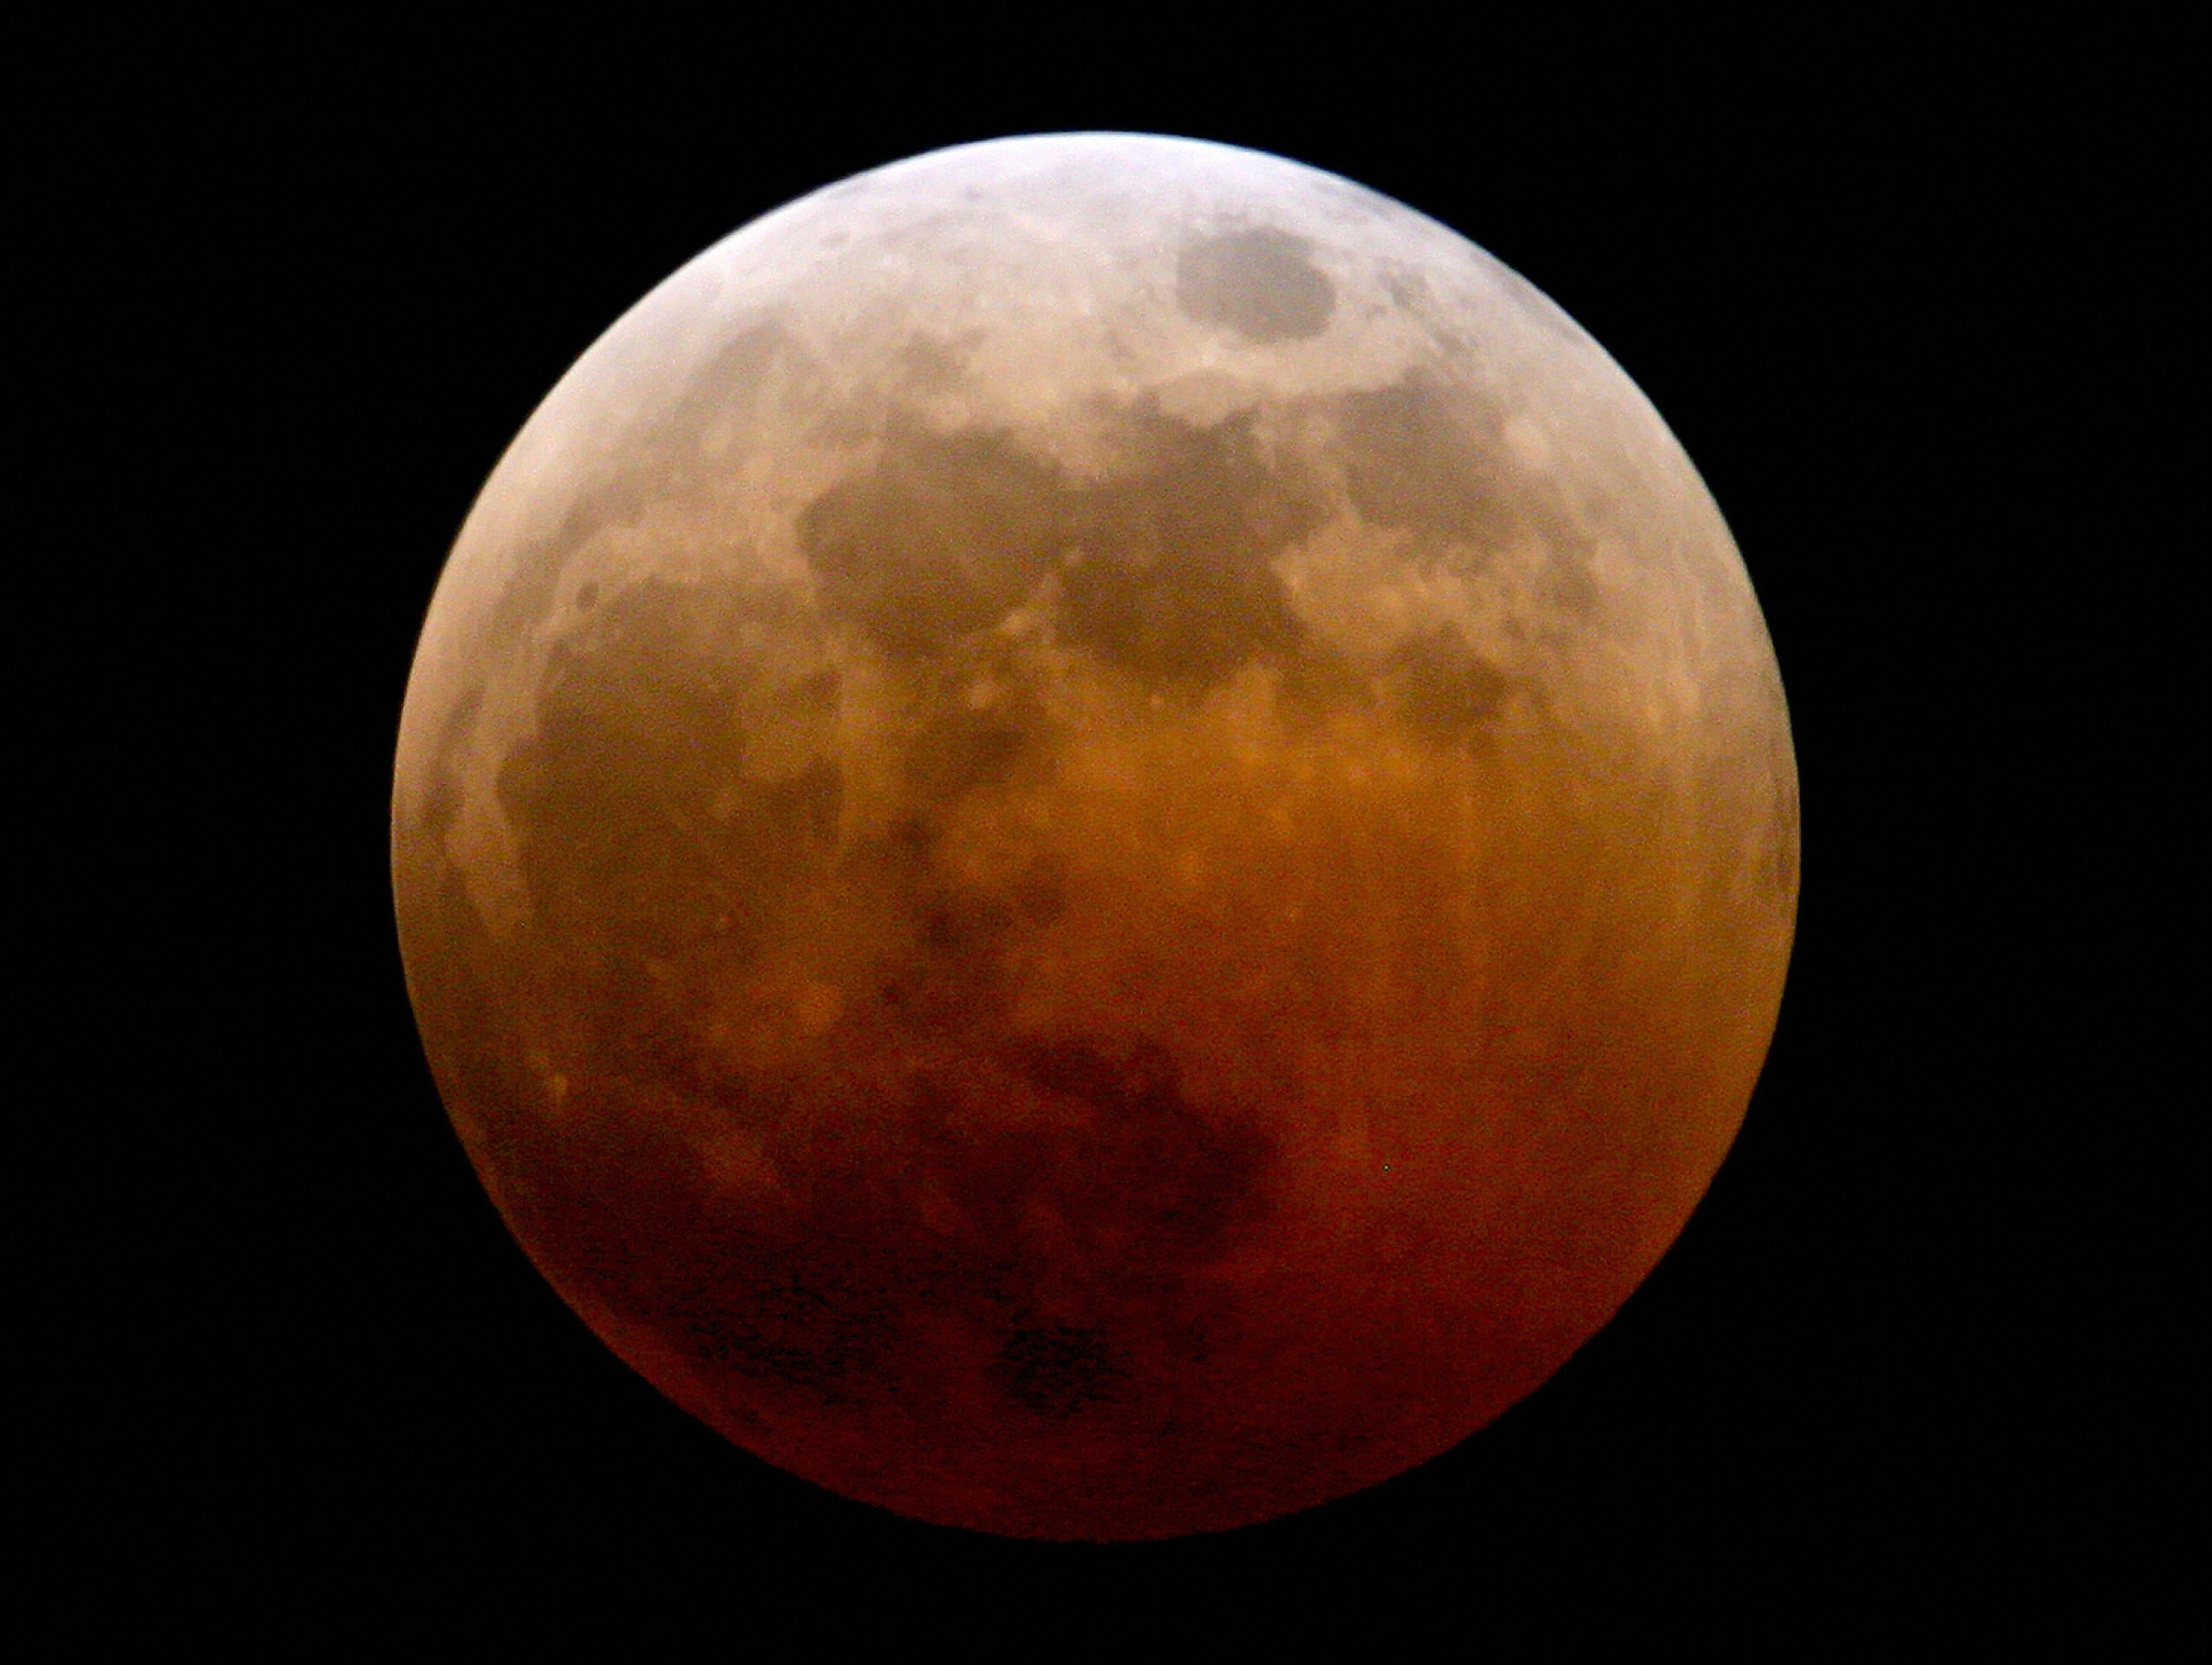 A 'blood Moon' from 2011. The coppery hue is caused by light from the sun refracting through the Earth's atmosphere and striking the surface of the Moon - it's the same mechanism that makes sunsets and sunrises appear red.